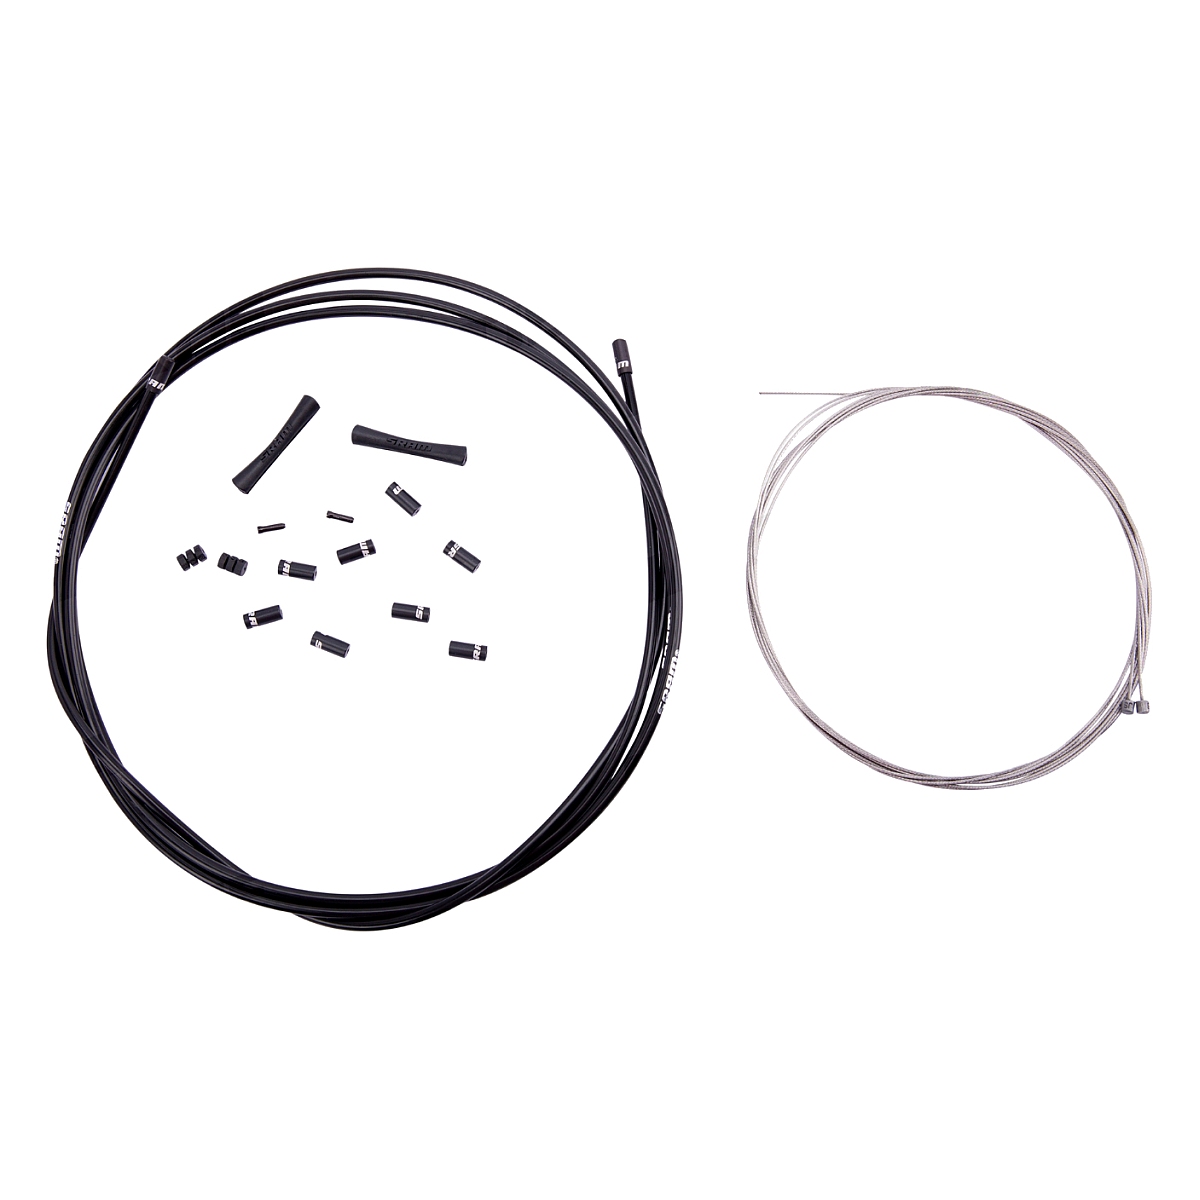 Picture of SRAM Road &amp; MTB Stainless Shift Cable Kit - 4mm - black